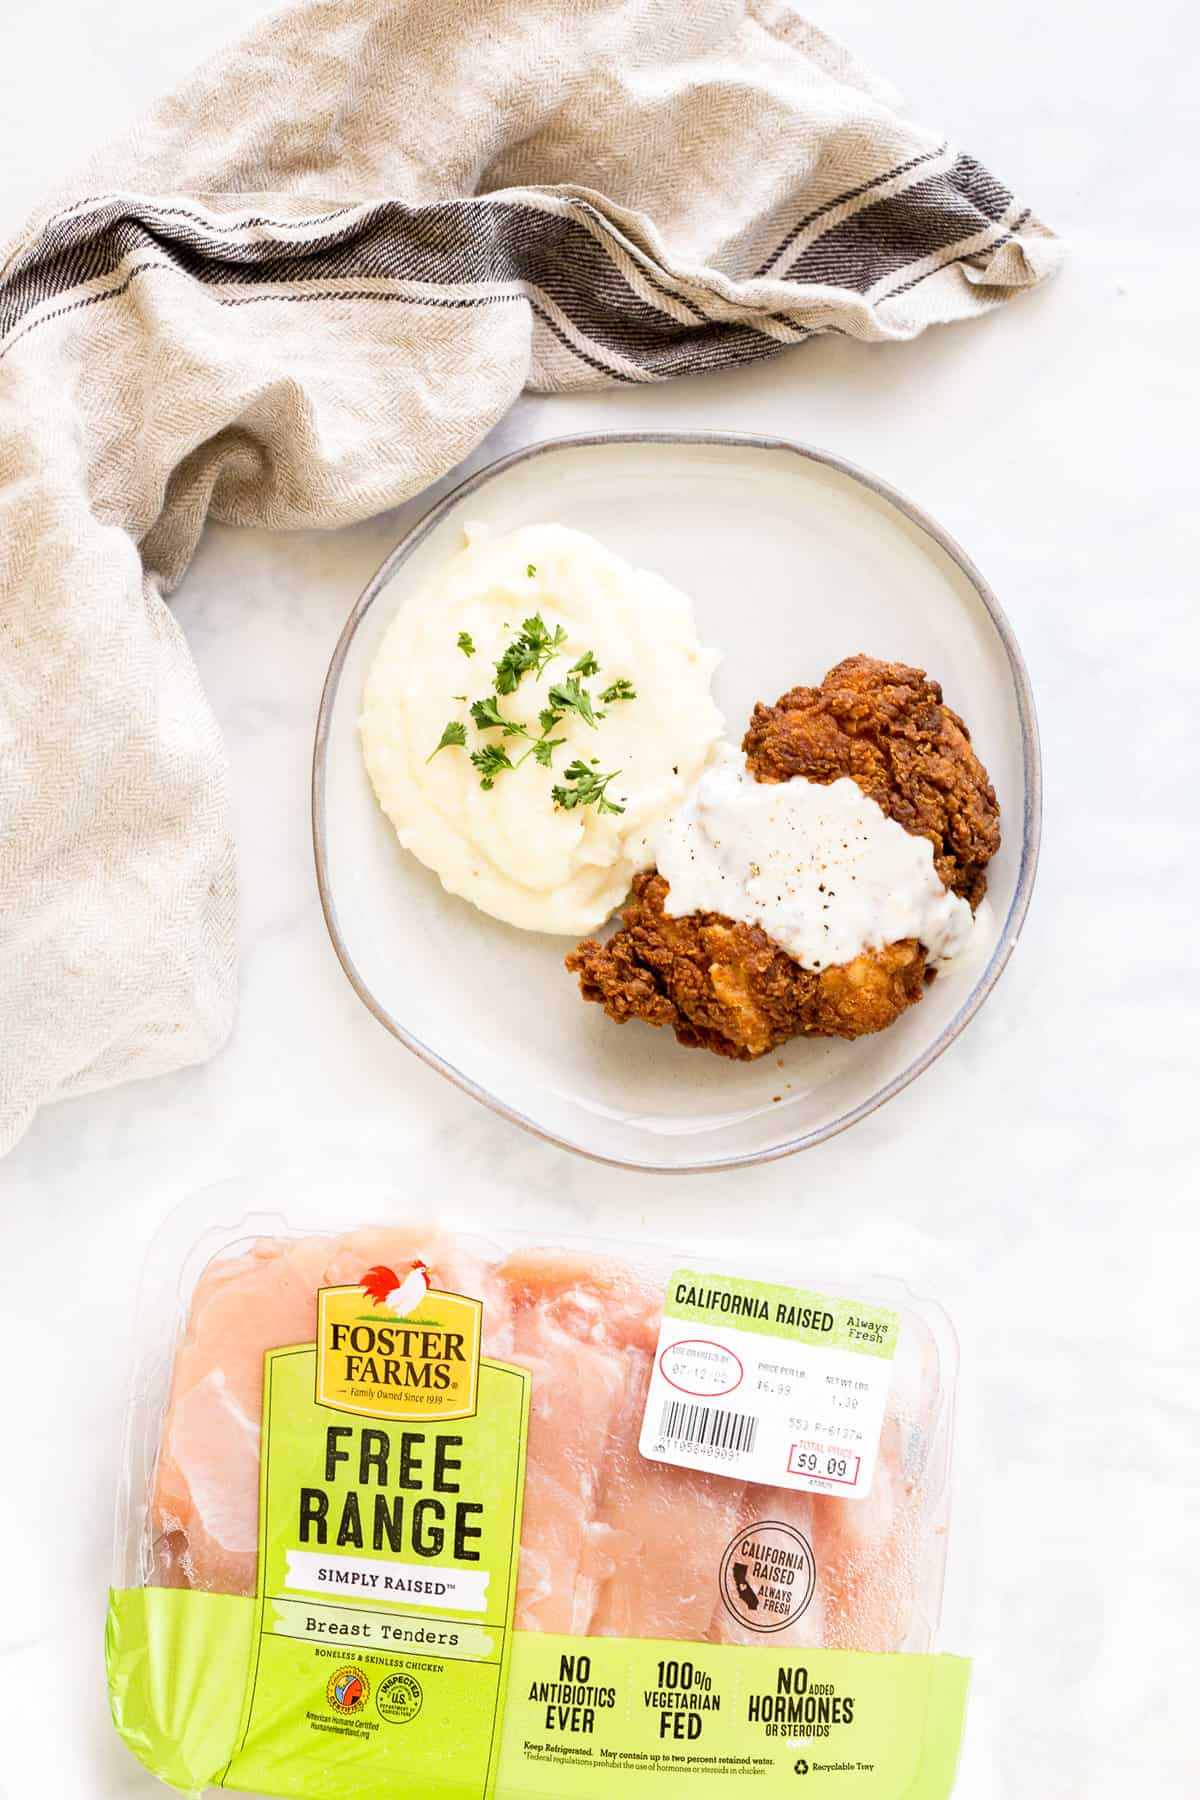 A plate of Chicken Fried Chicken next to package of Foster Farms chicken breasts